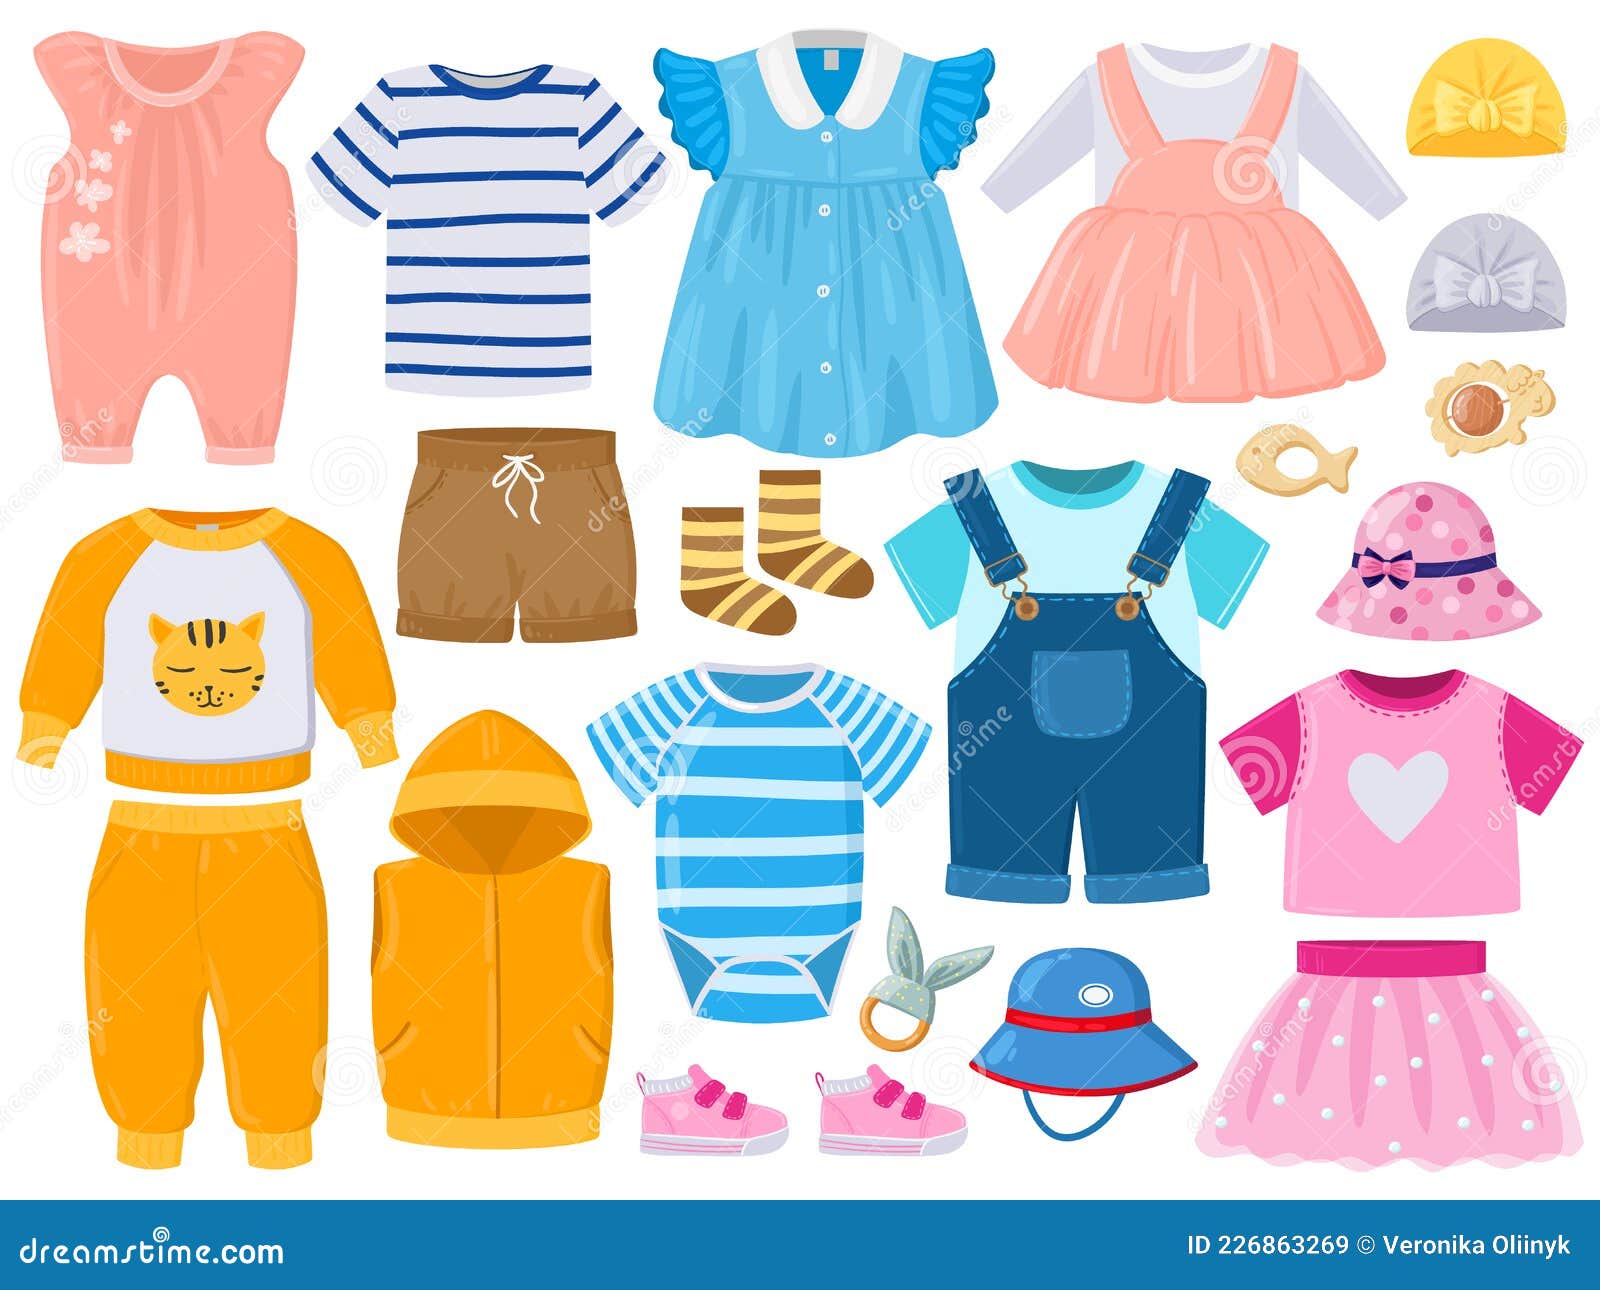 cartoon baby kids girl and boy clothes, hats, shoes. childrens fashion clothes, romper, shorts, dress and shoes 